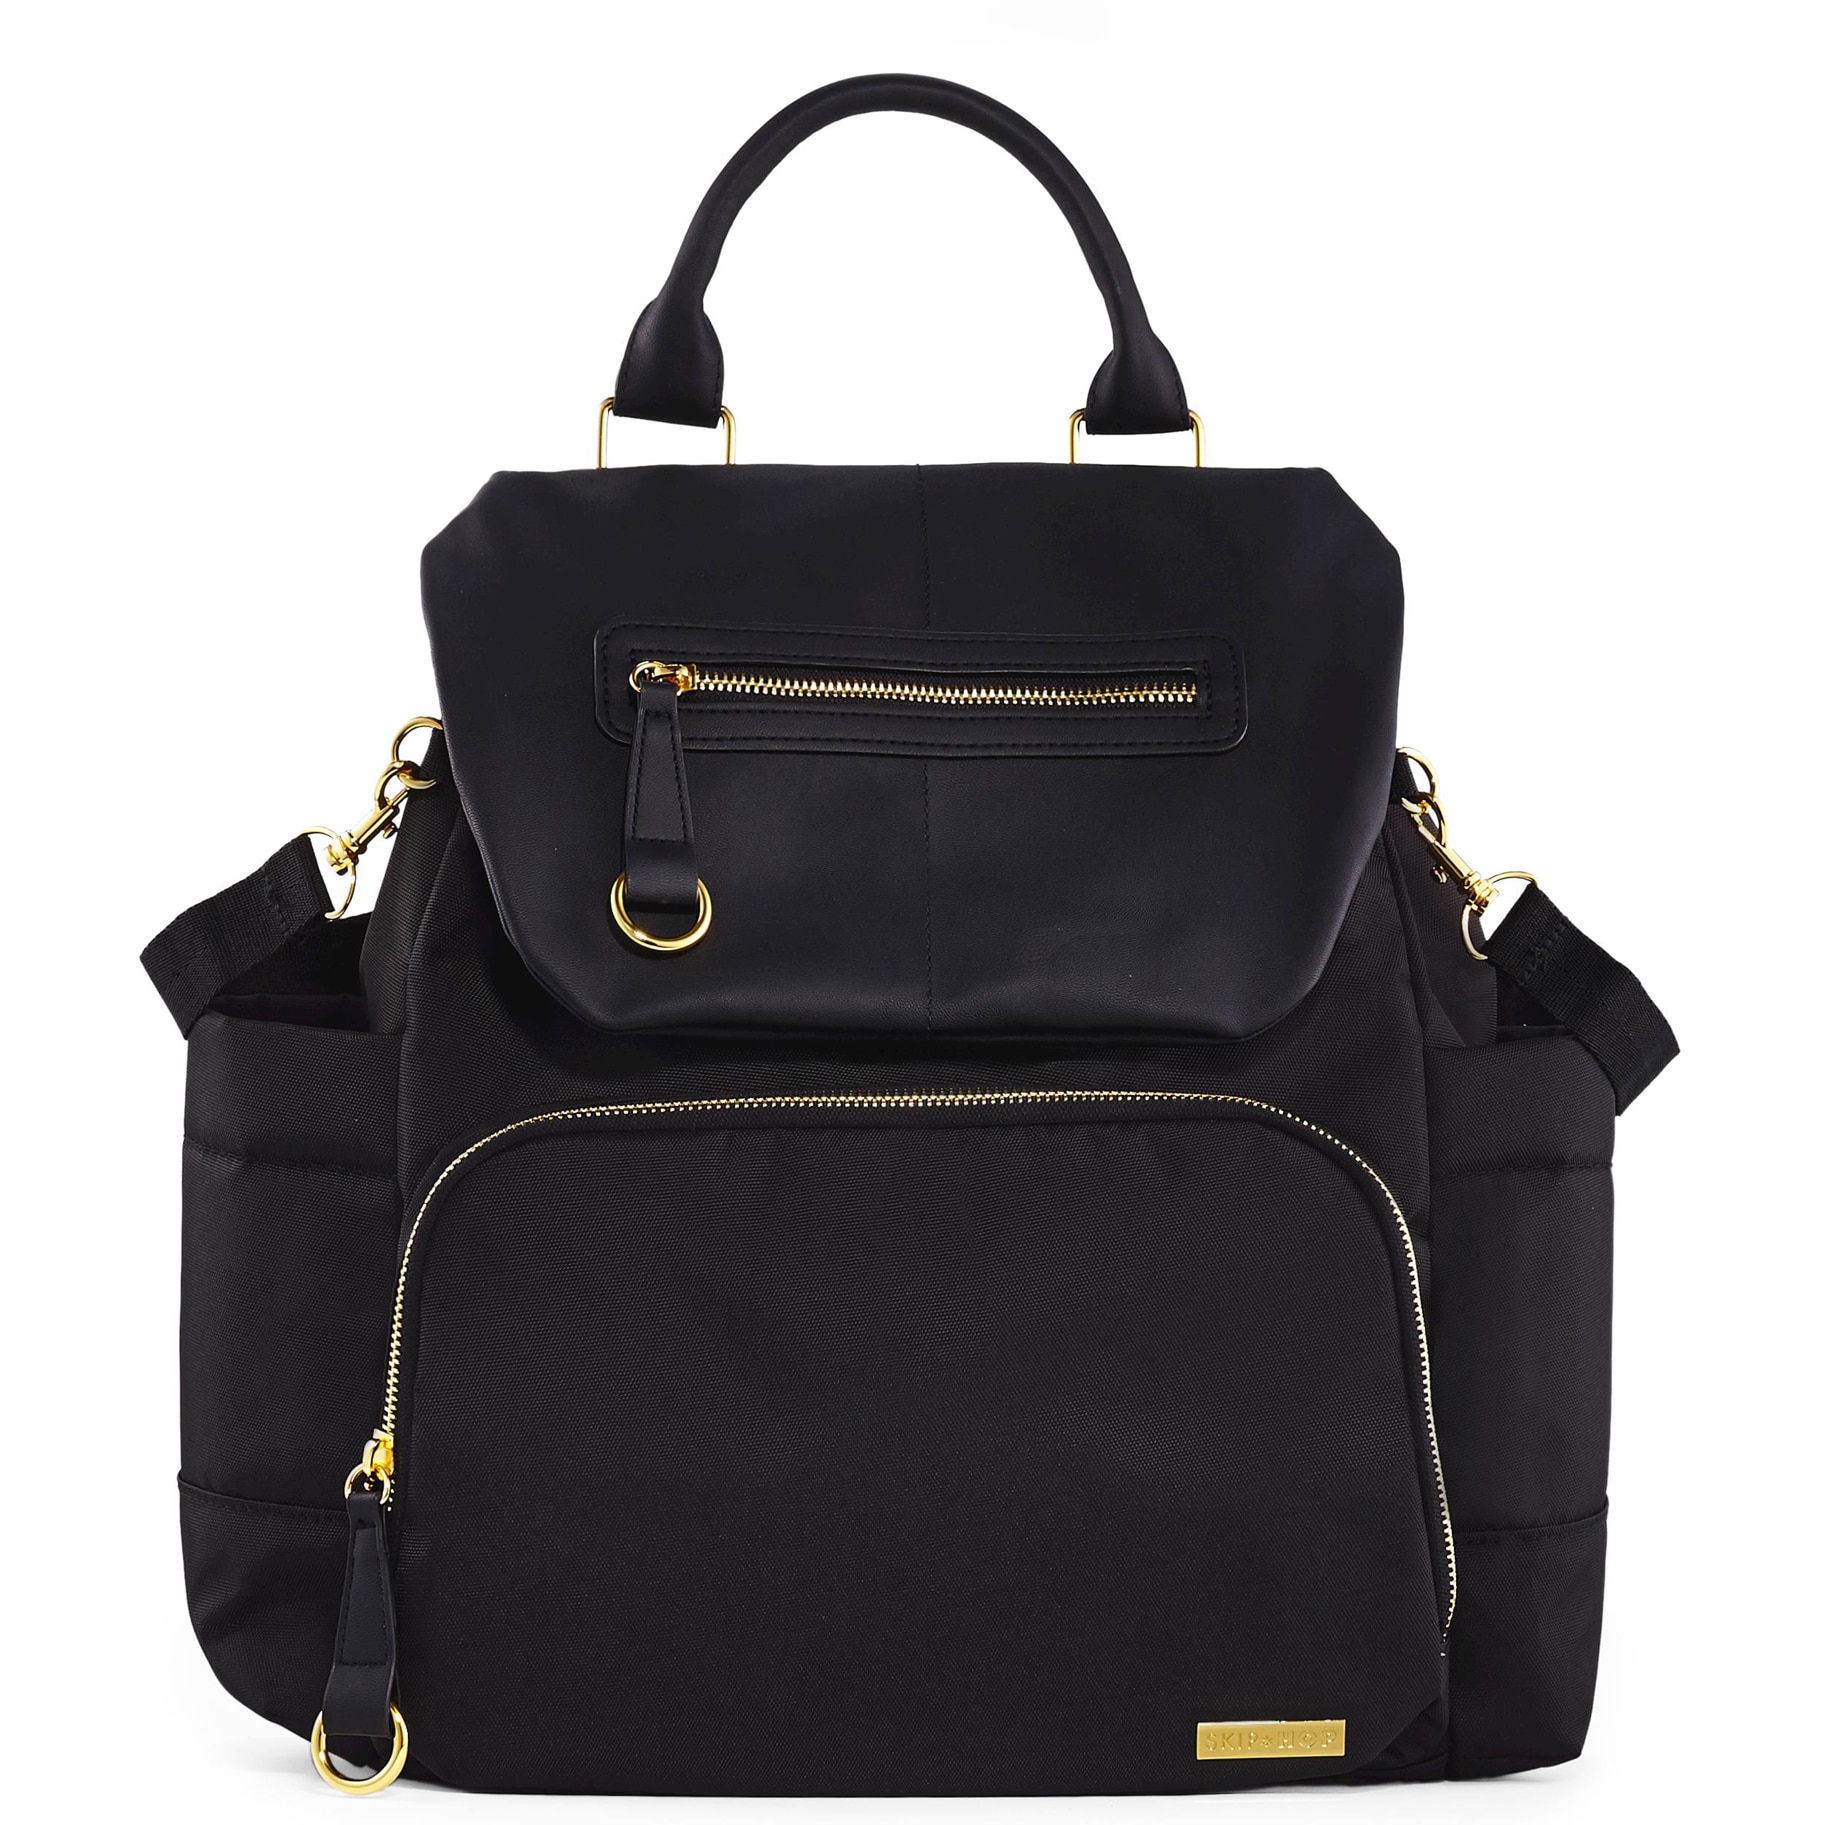 Stylish Diaper Bags for New Moms | The Daily Dish